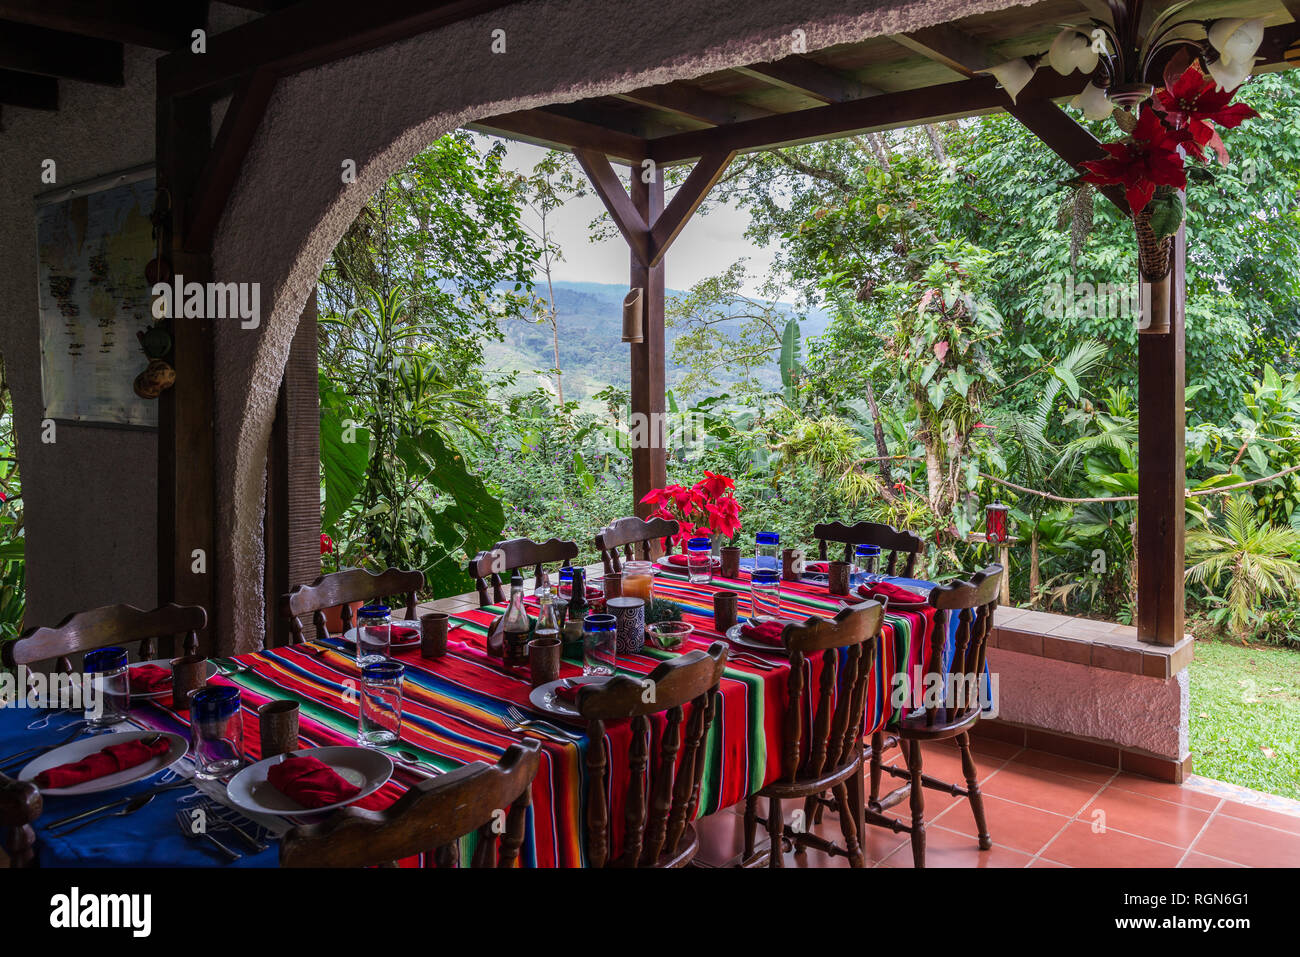 Dinning tables with colorful table cloth at an eco-lodge. Costa Rica, Central America. Stock Photo